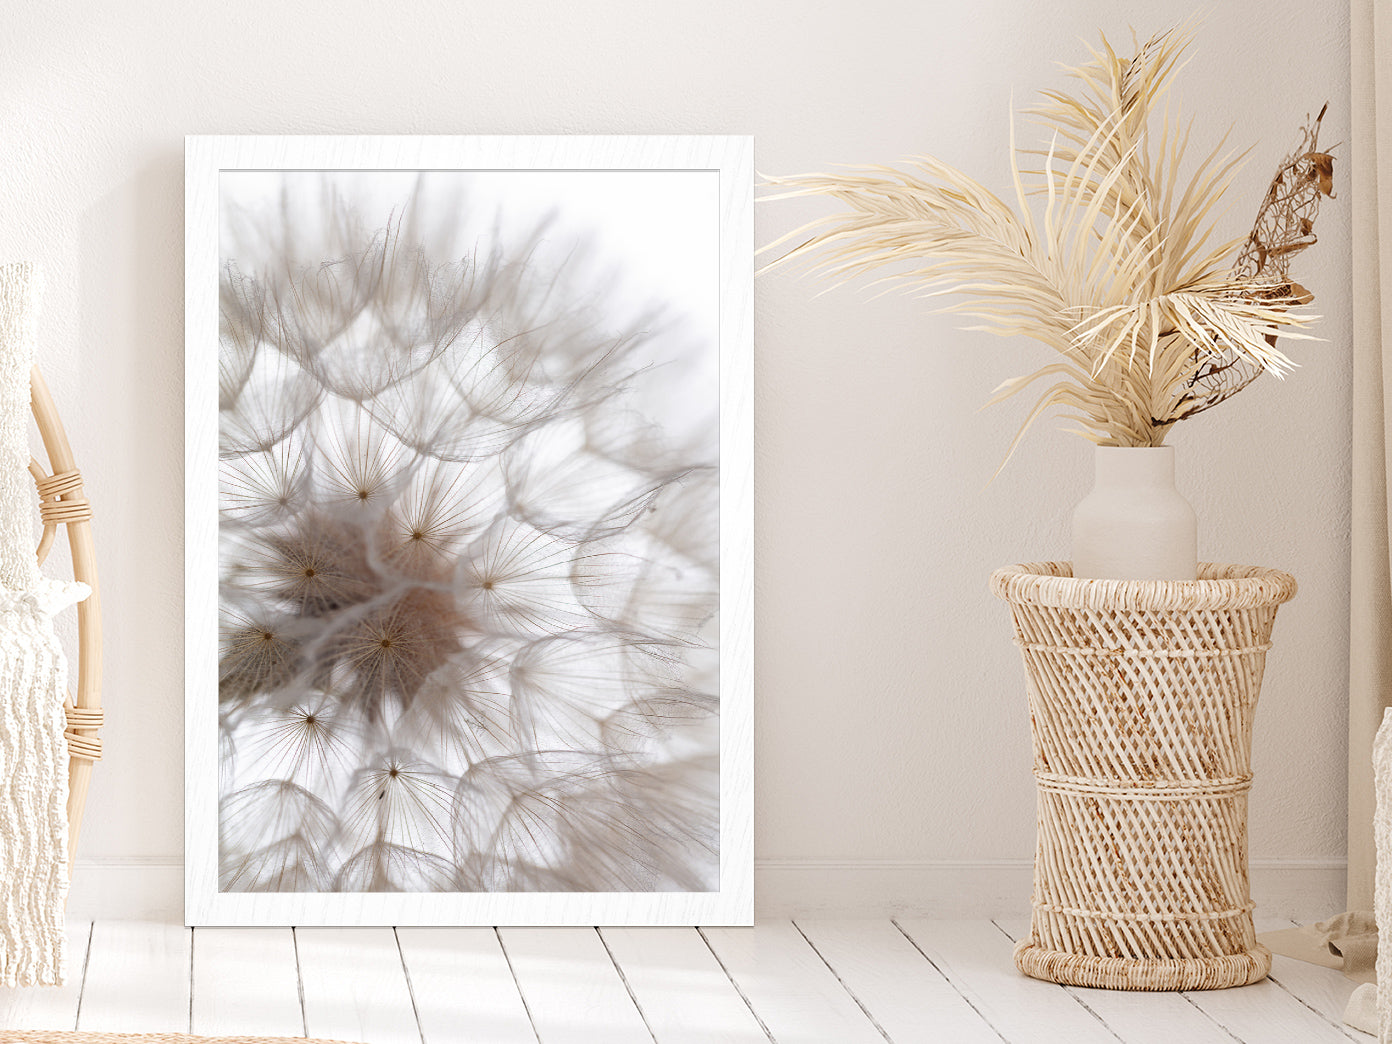 Dandelion Macro Flower Abstract Glass Framed Wall Art, Ready to Hang Quality Print Without White Border White